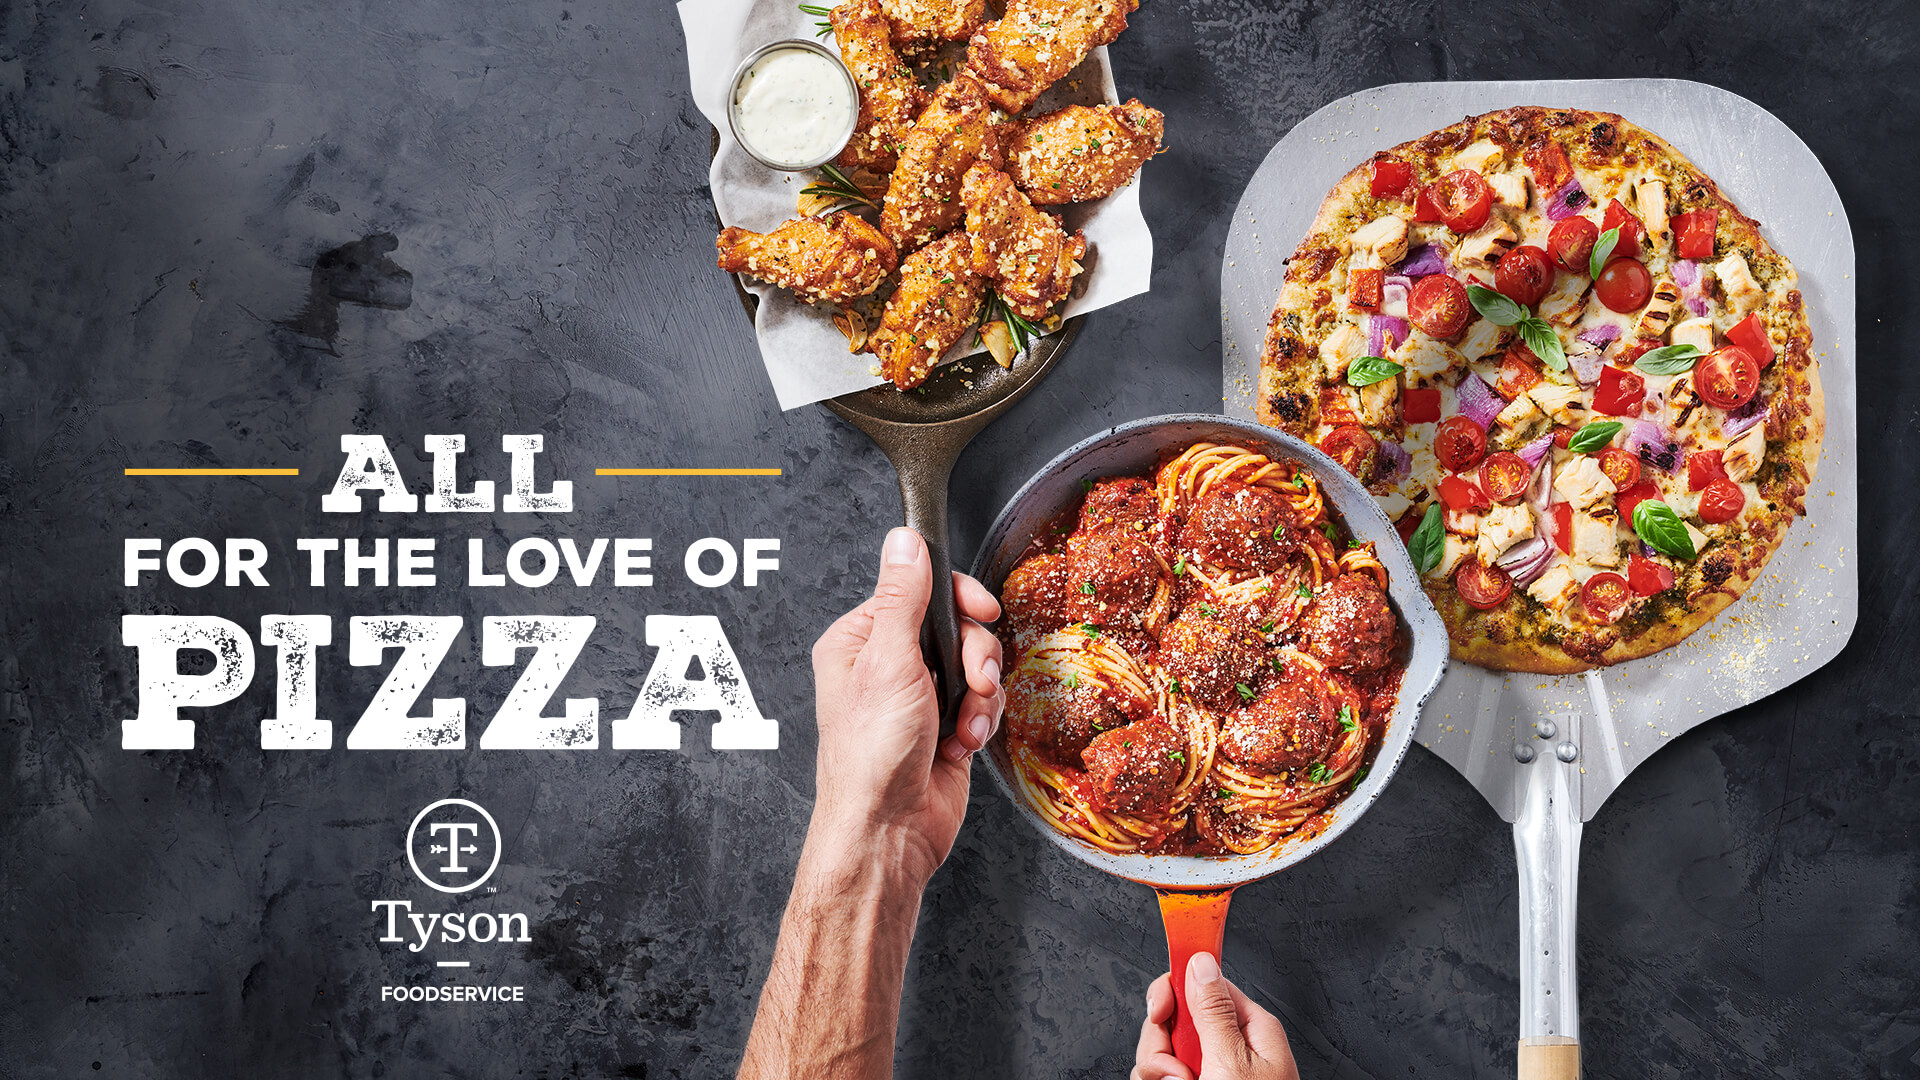 All for the love of pizza. Gray background, featuring garlic parmesan wings, spaghetti and meatballs, and pesto chicken pizza.